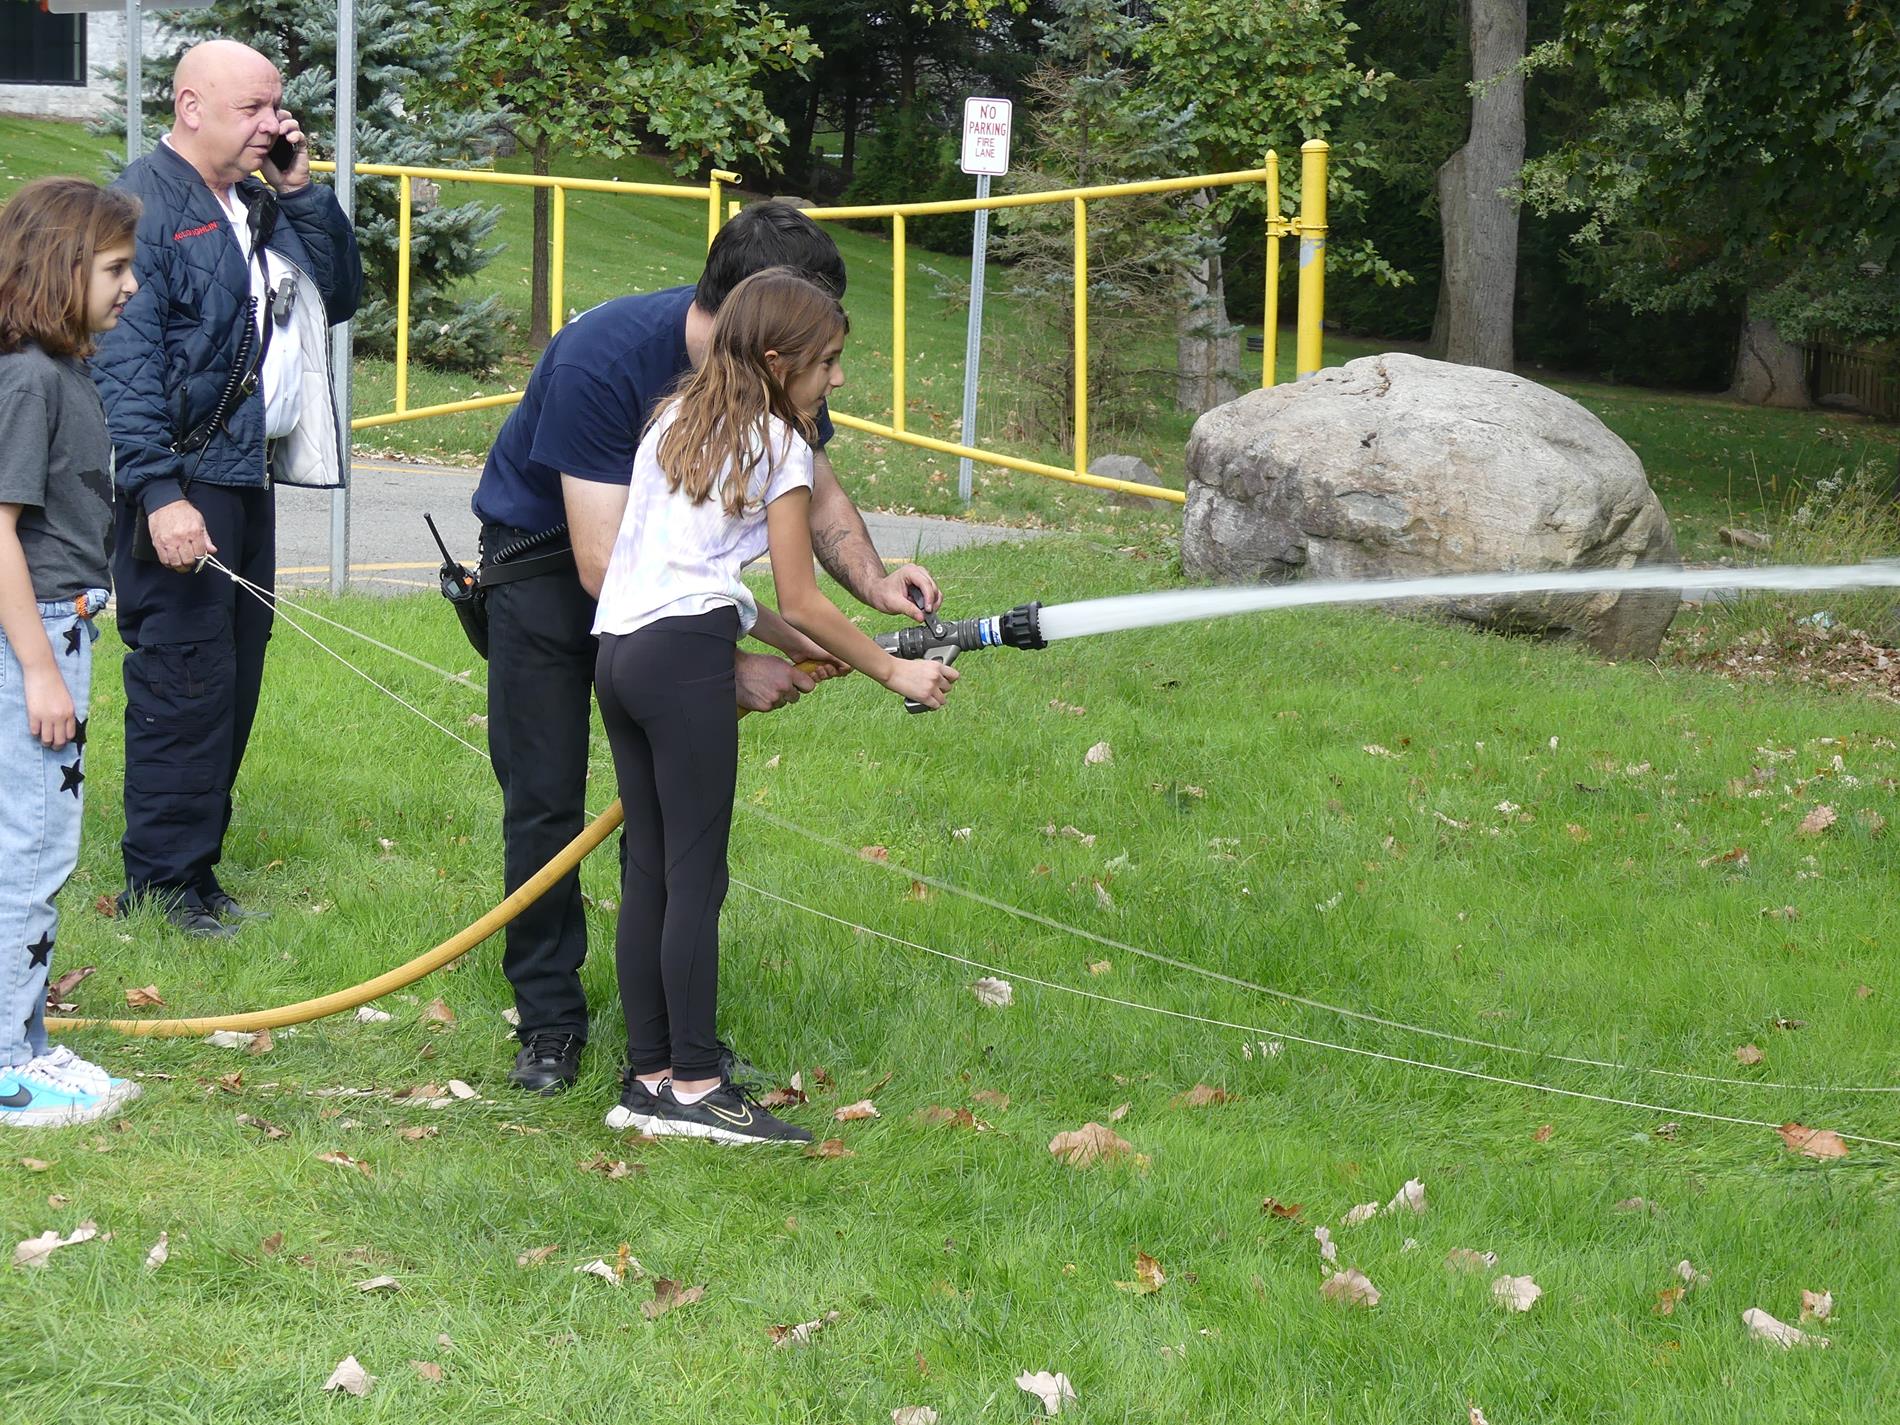 Student learning to use fire hose